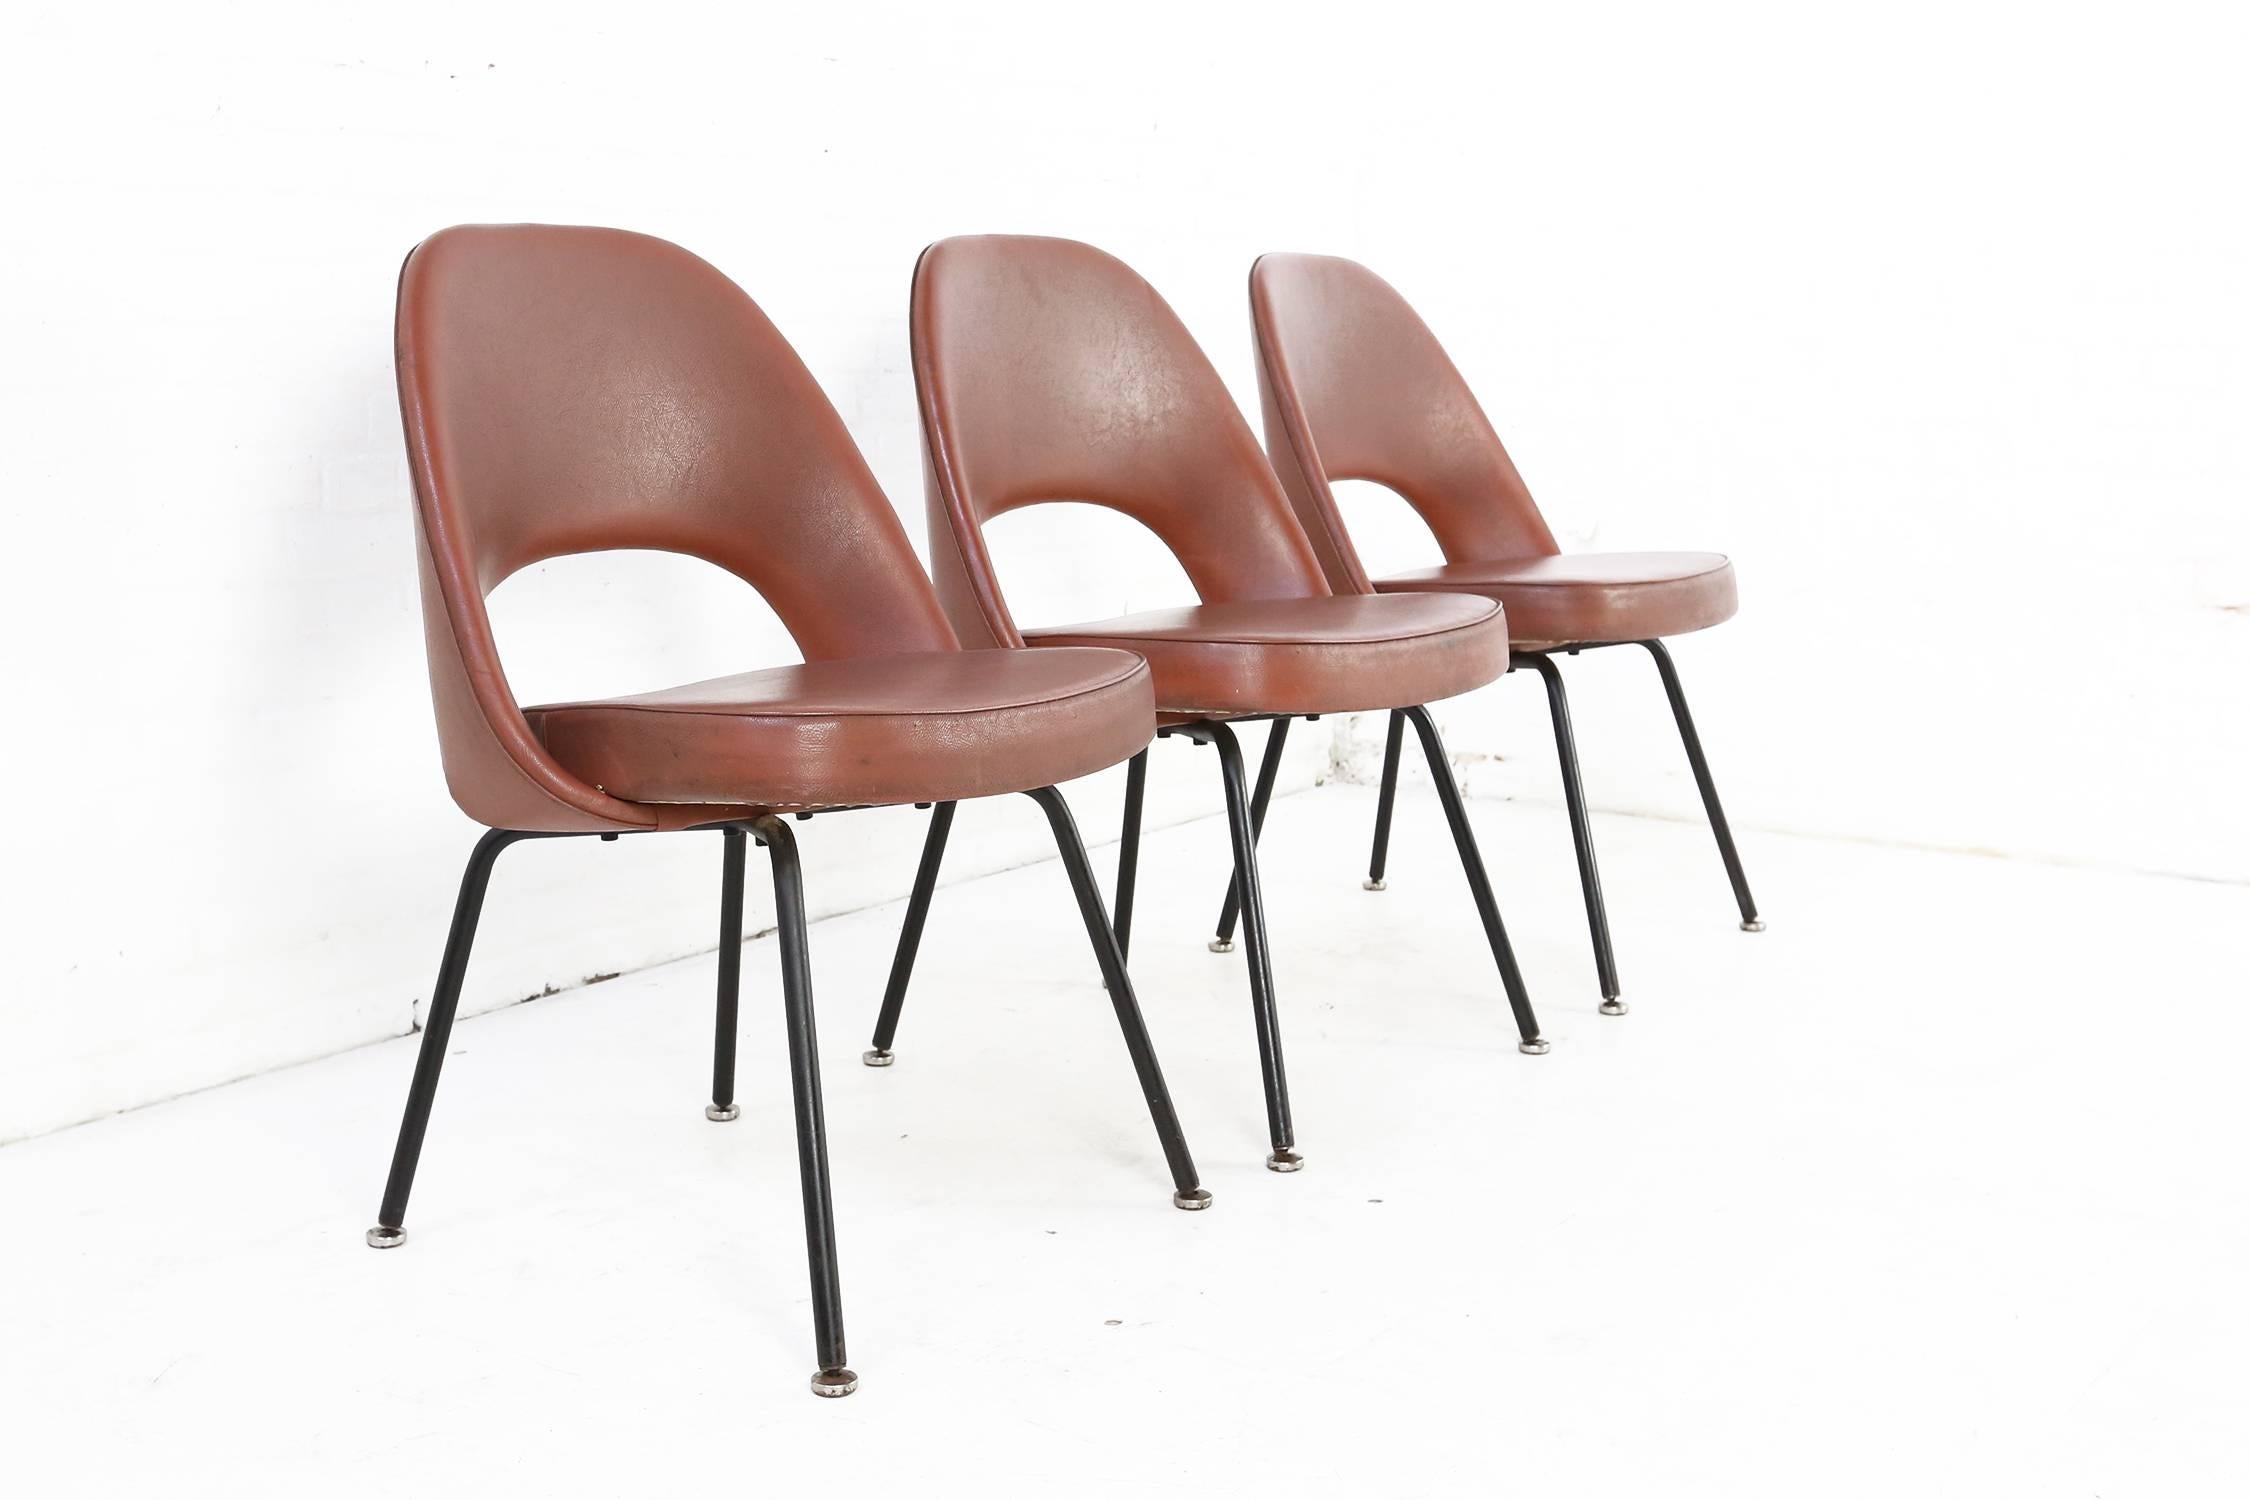 Comfortable and elegant Saarinen armless executive chairs for Knoll manufactured by De Coene. De Coene was a Belgian manufacturer located in Kortrijk which, as from 1954, had the exclusive rights for production and selling Knoll furniture in the